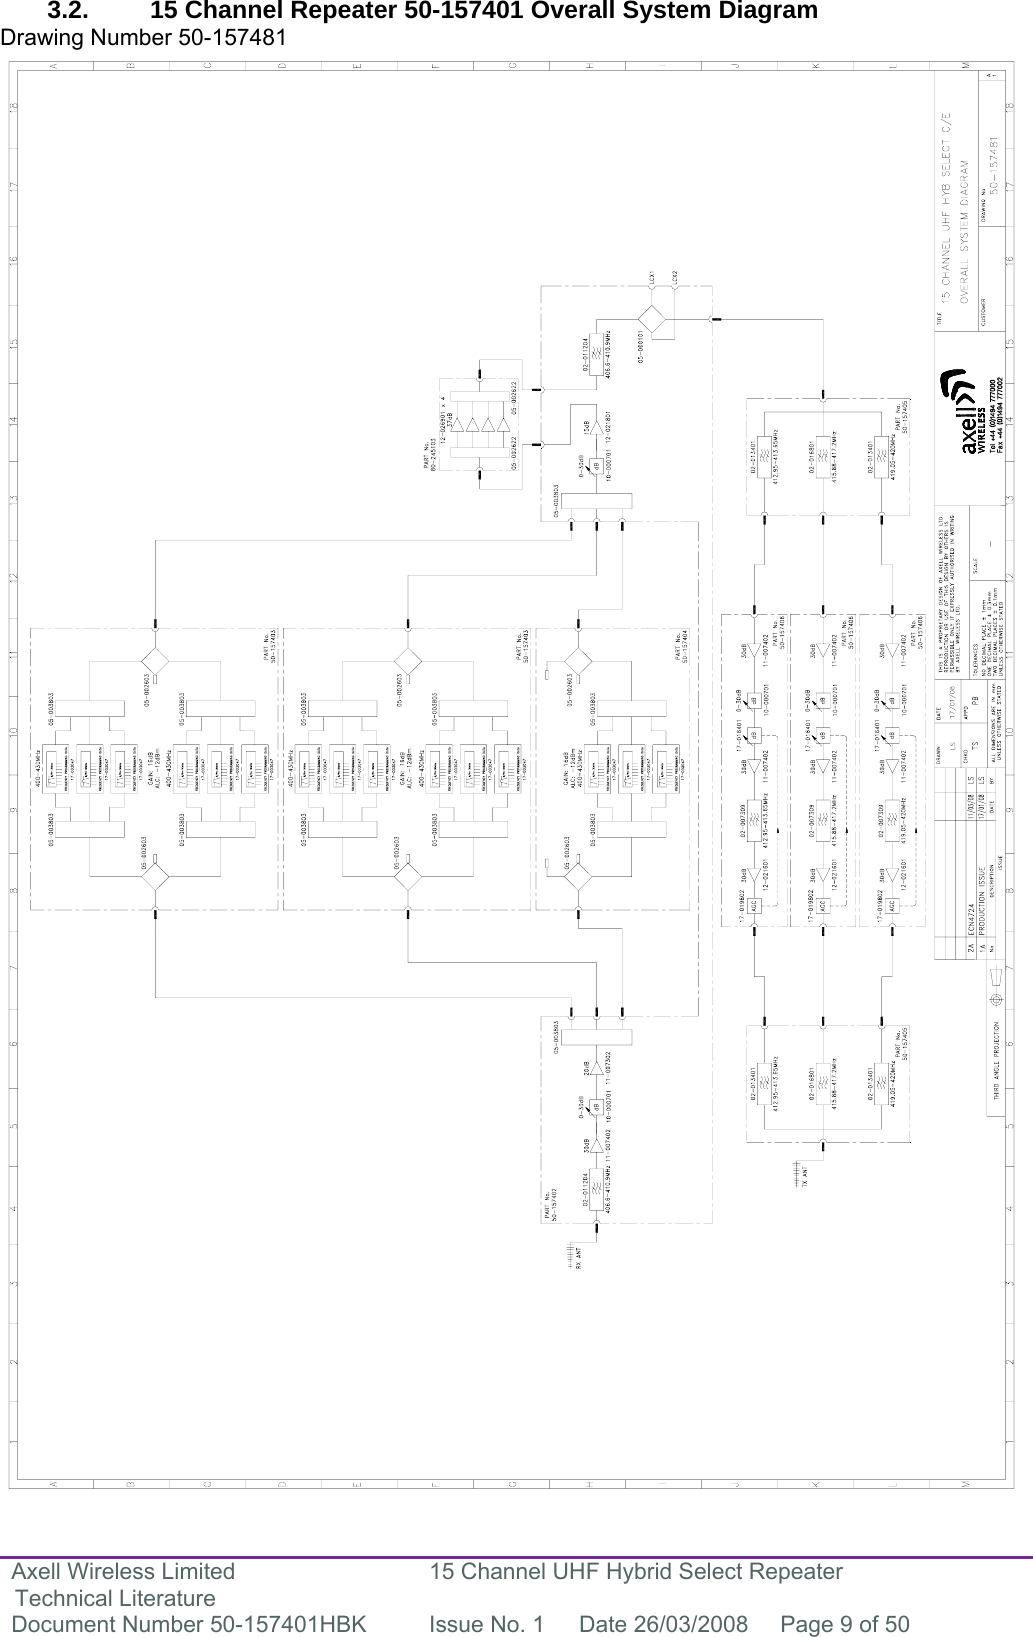 Axell Wireless Limited Technical Literature 15 Channel UHF Hybrid Select Repeater Document Number 50-157401HBK  Issue No. 1  Date 26/03/2008  Page 9 of 50   3.2.  15 Channel Repeater 50-157401 Overall System Diagram Drawing Number 50-157481                                                        